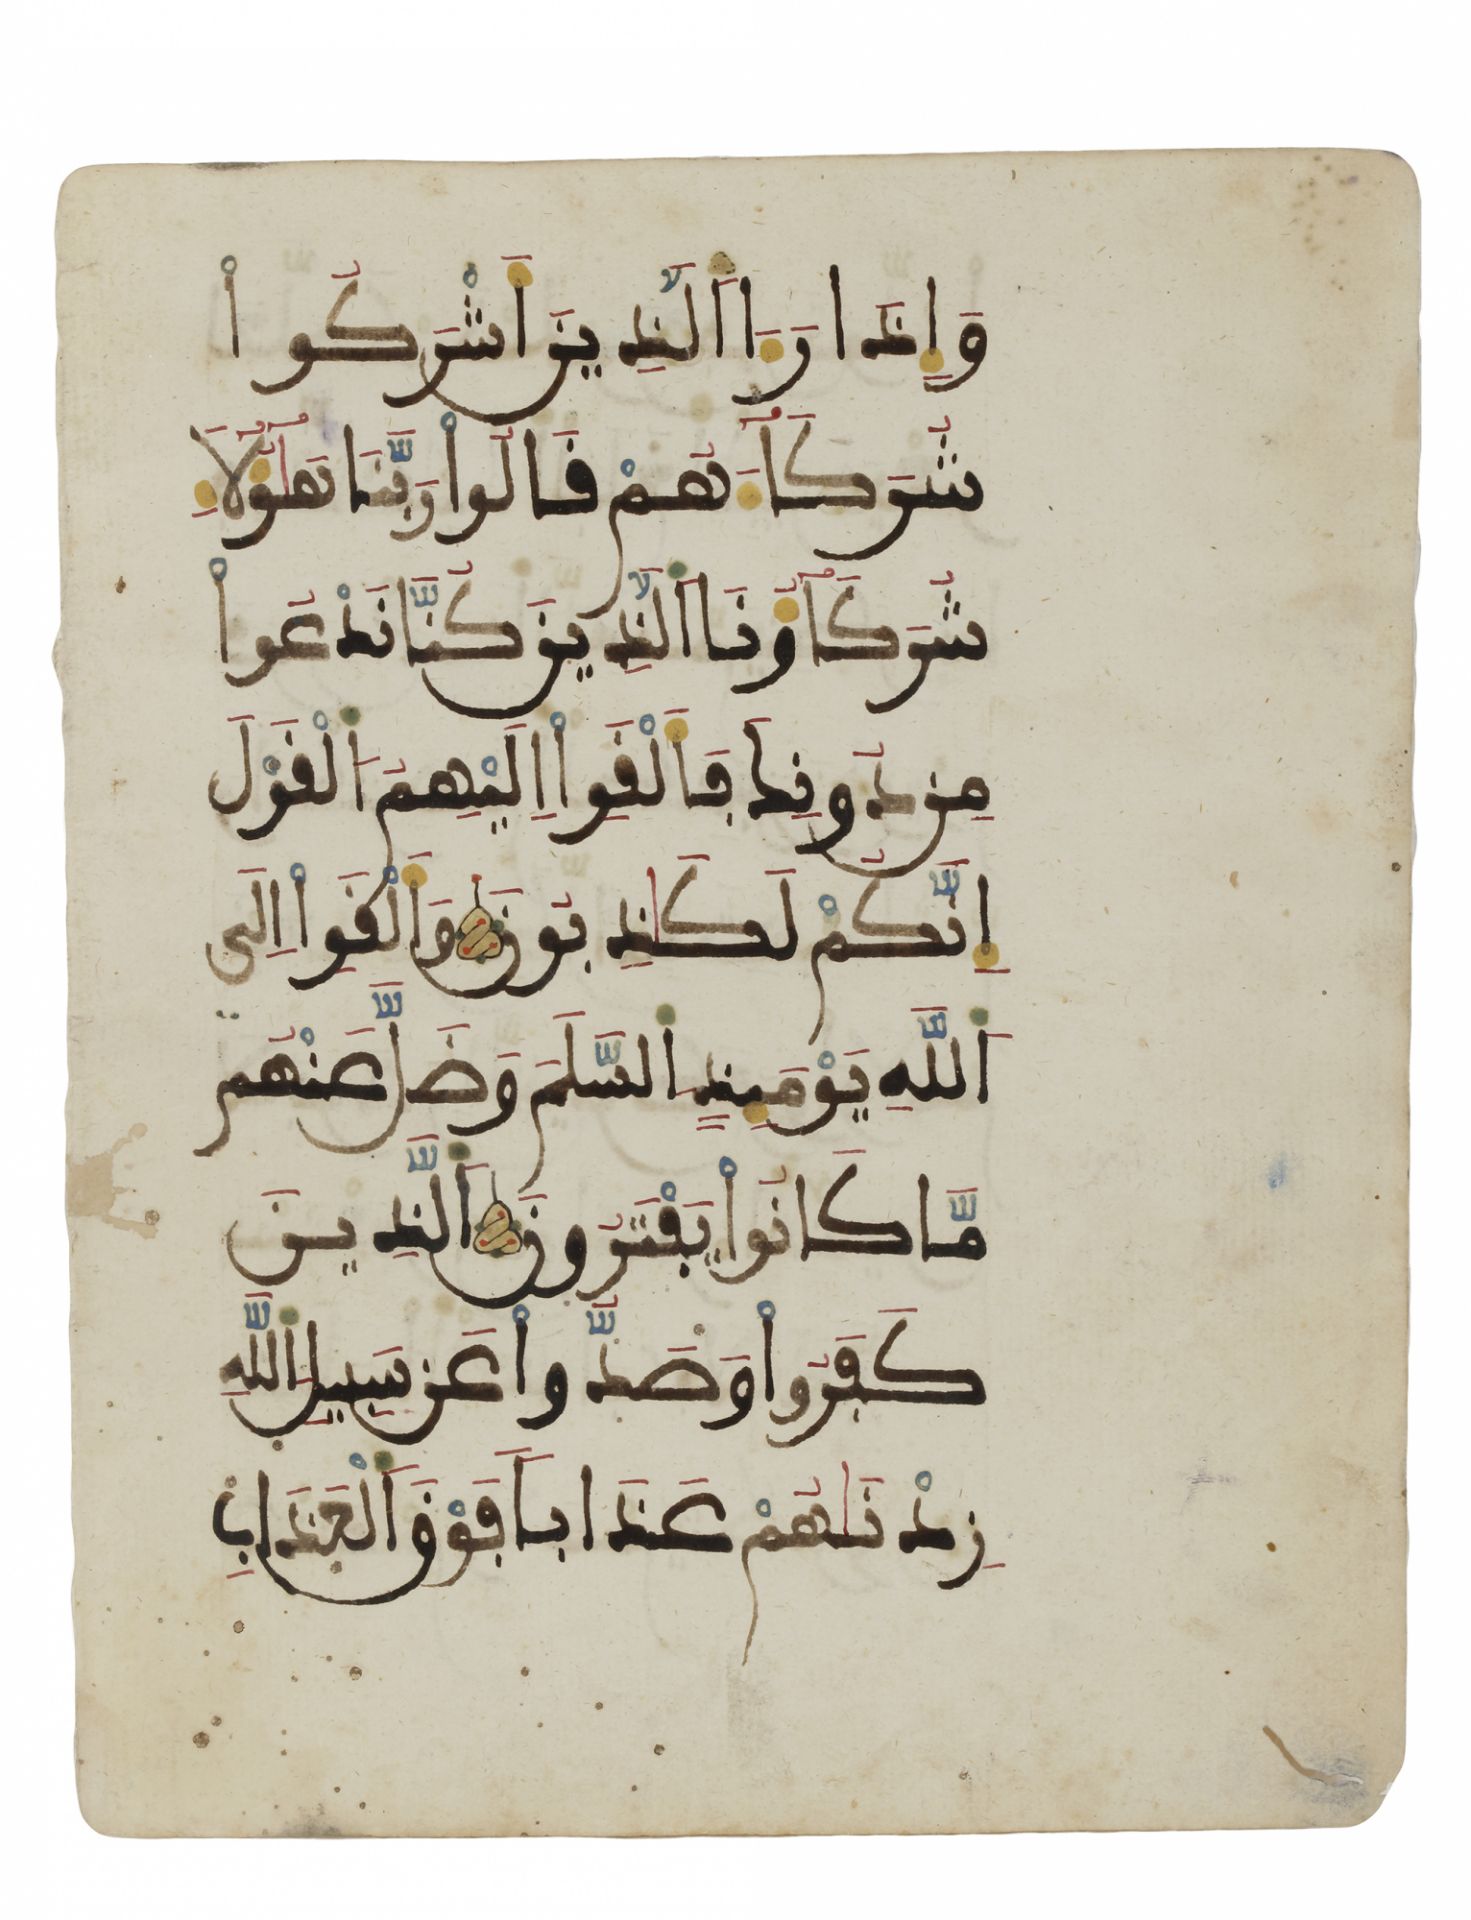 TWO QURAN FOLIA IN MAGHRIBI SCRIPT, NORTH AFRICA OR ANDALUSIA, 13TH-14TH CENTURY - Bild 3 aus 5